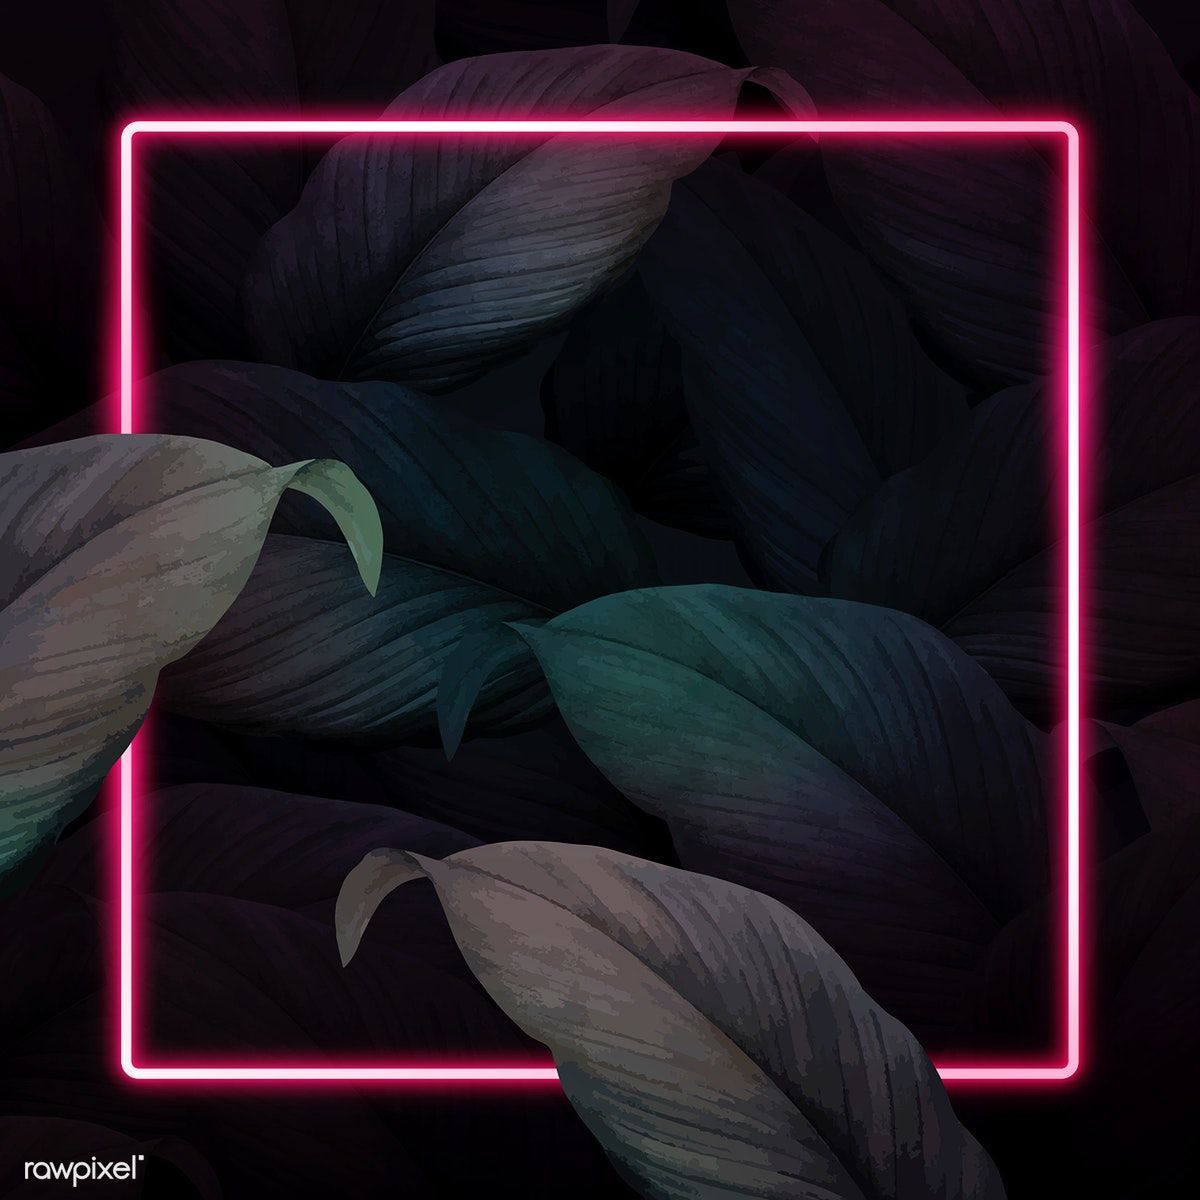 Download premium vector of Square pink neon frame on tropical leaves. Neon background, New background image, Pink neon wallpaper